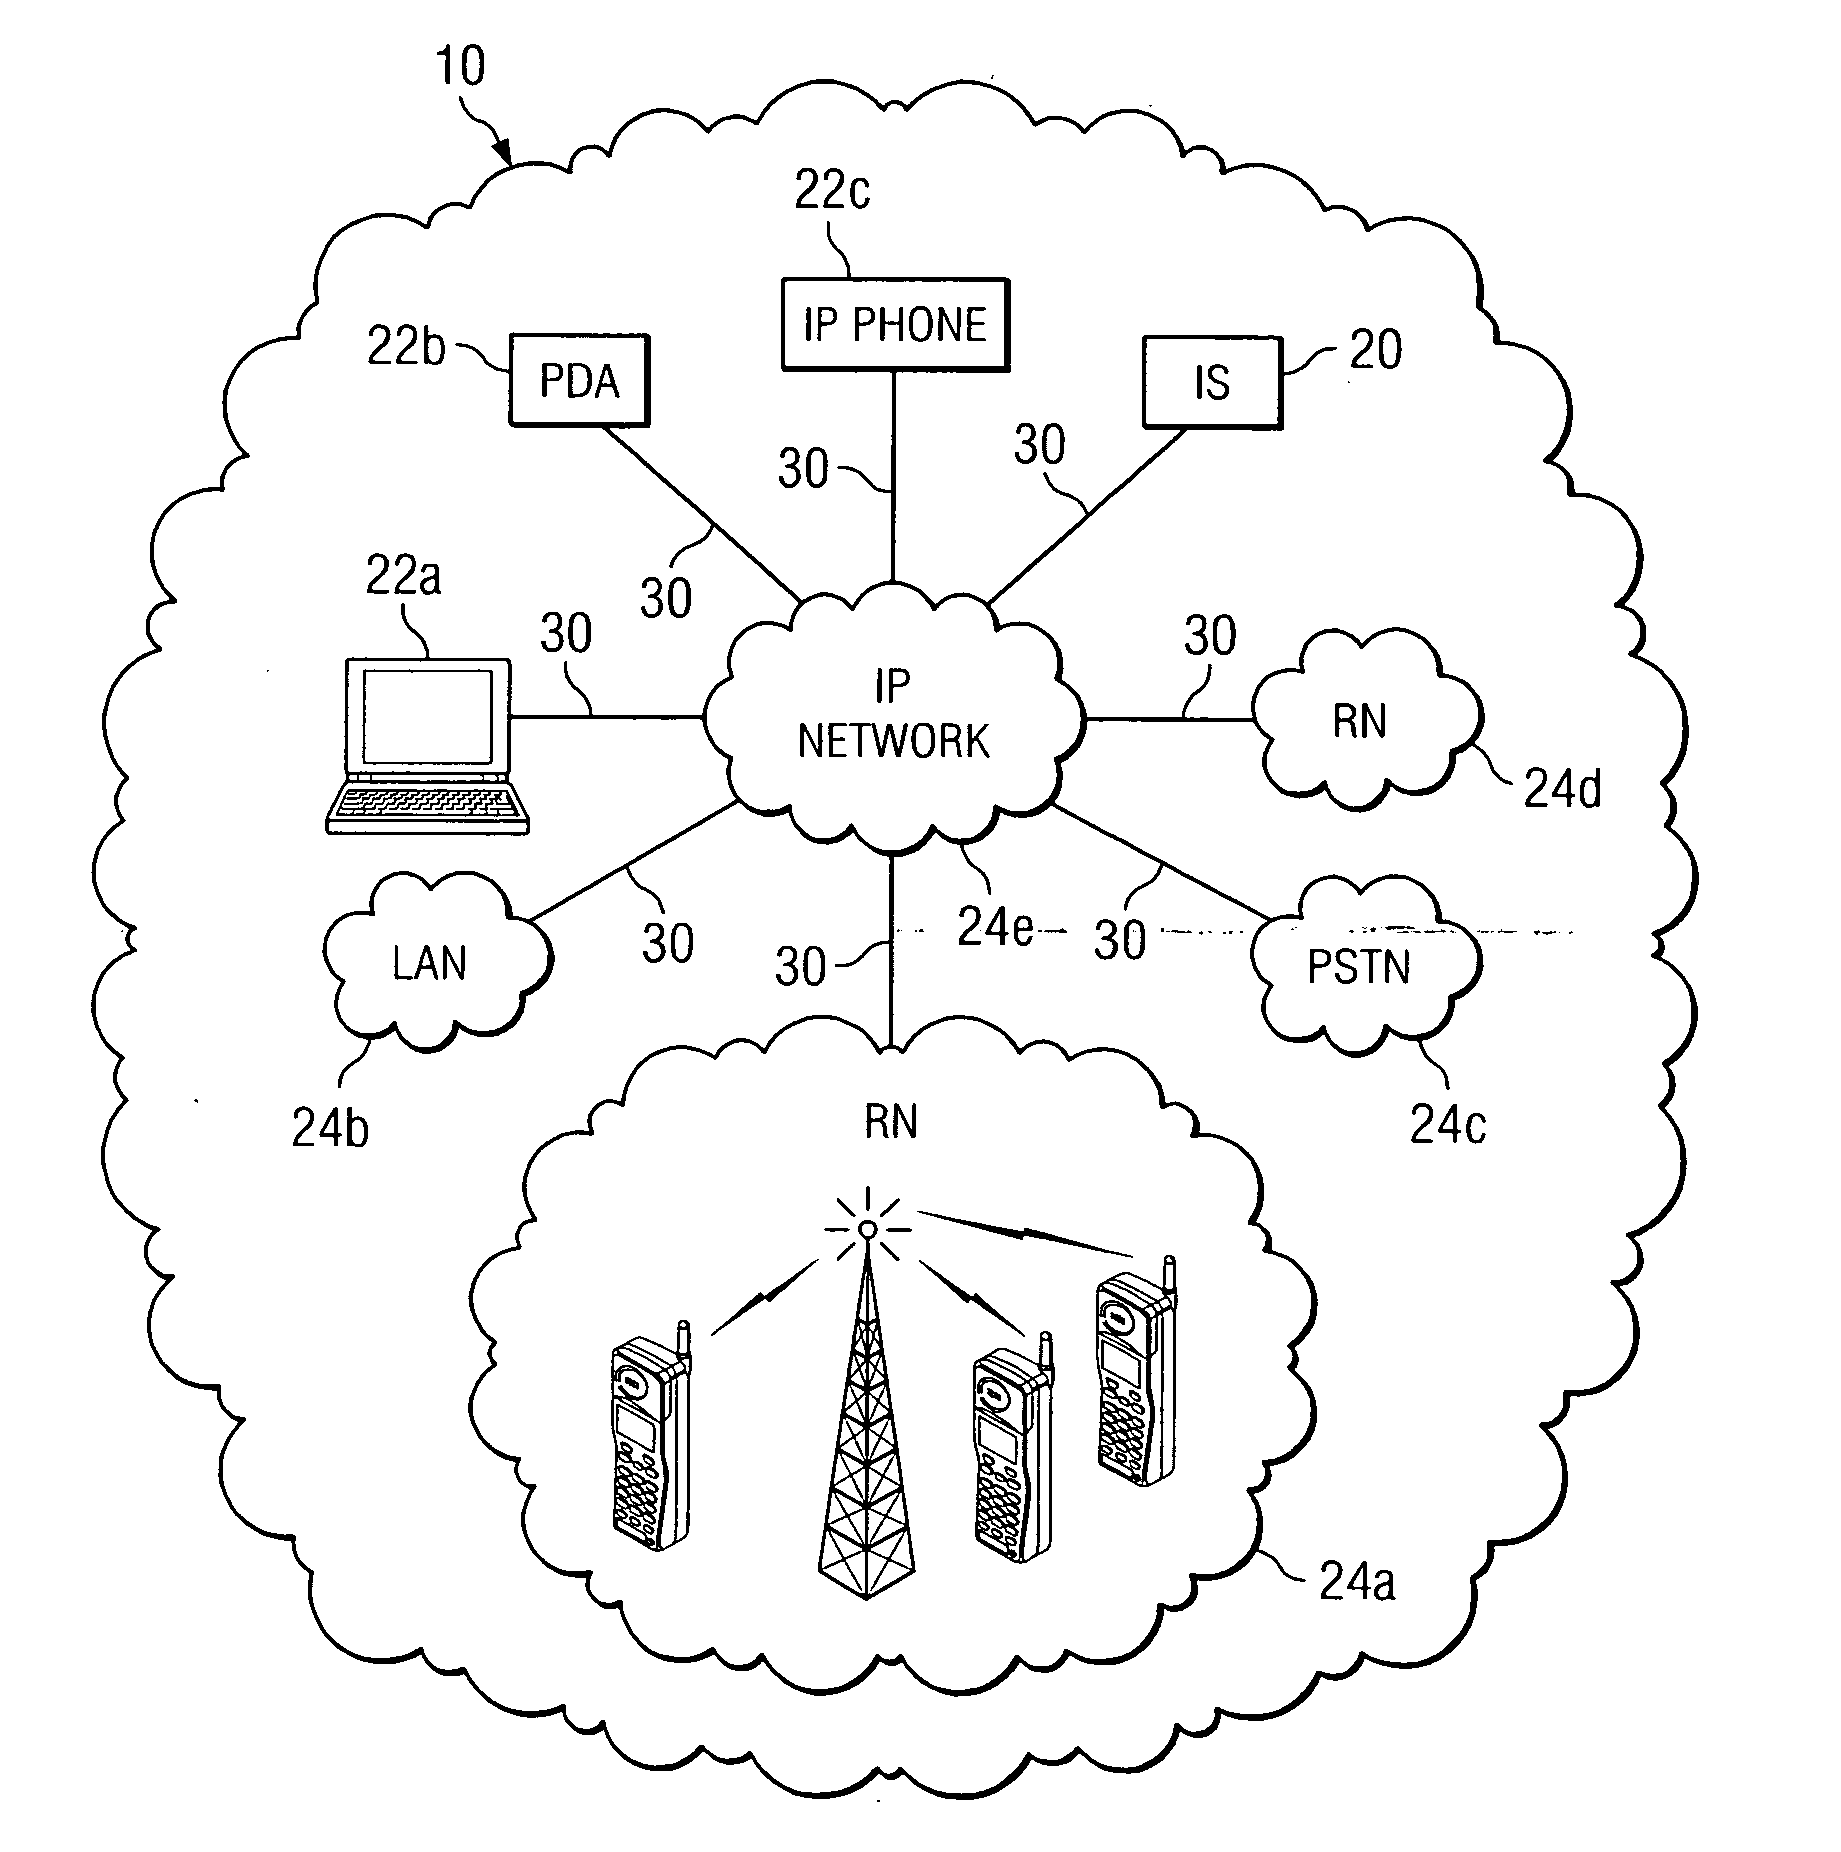 Method and system for automatic configuration of virtual talk groups based on location of media sources